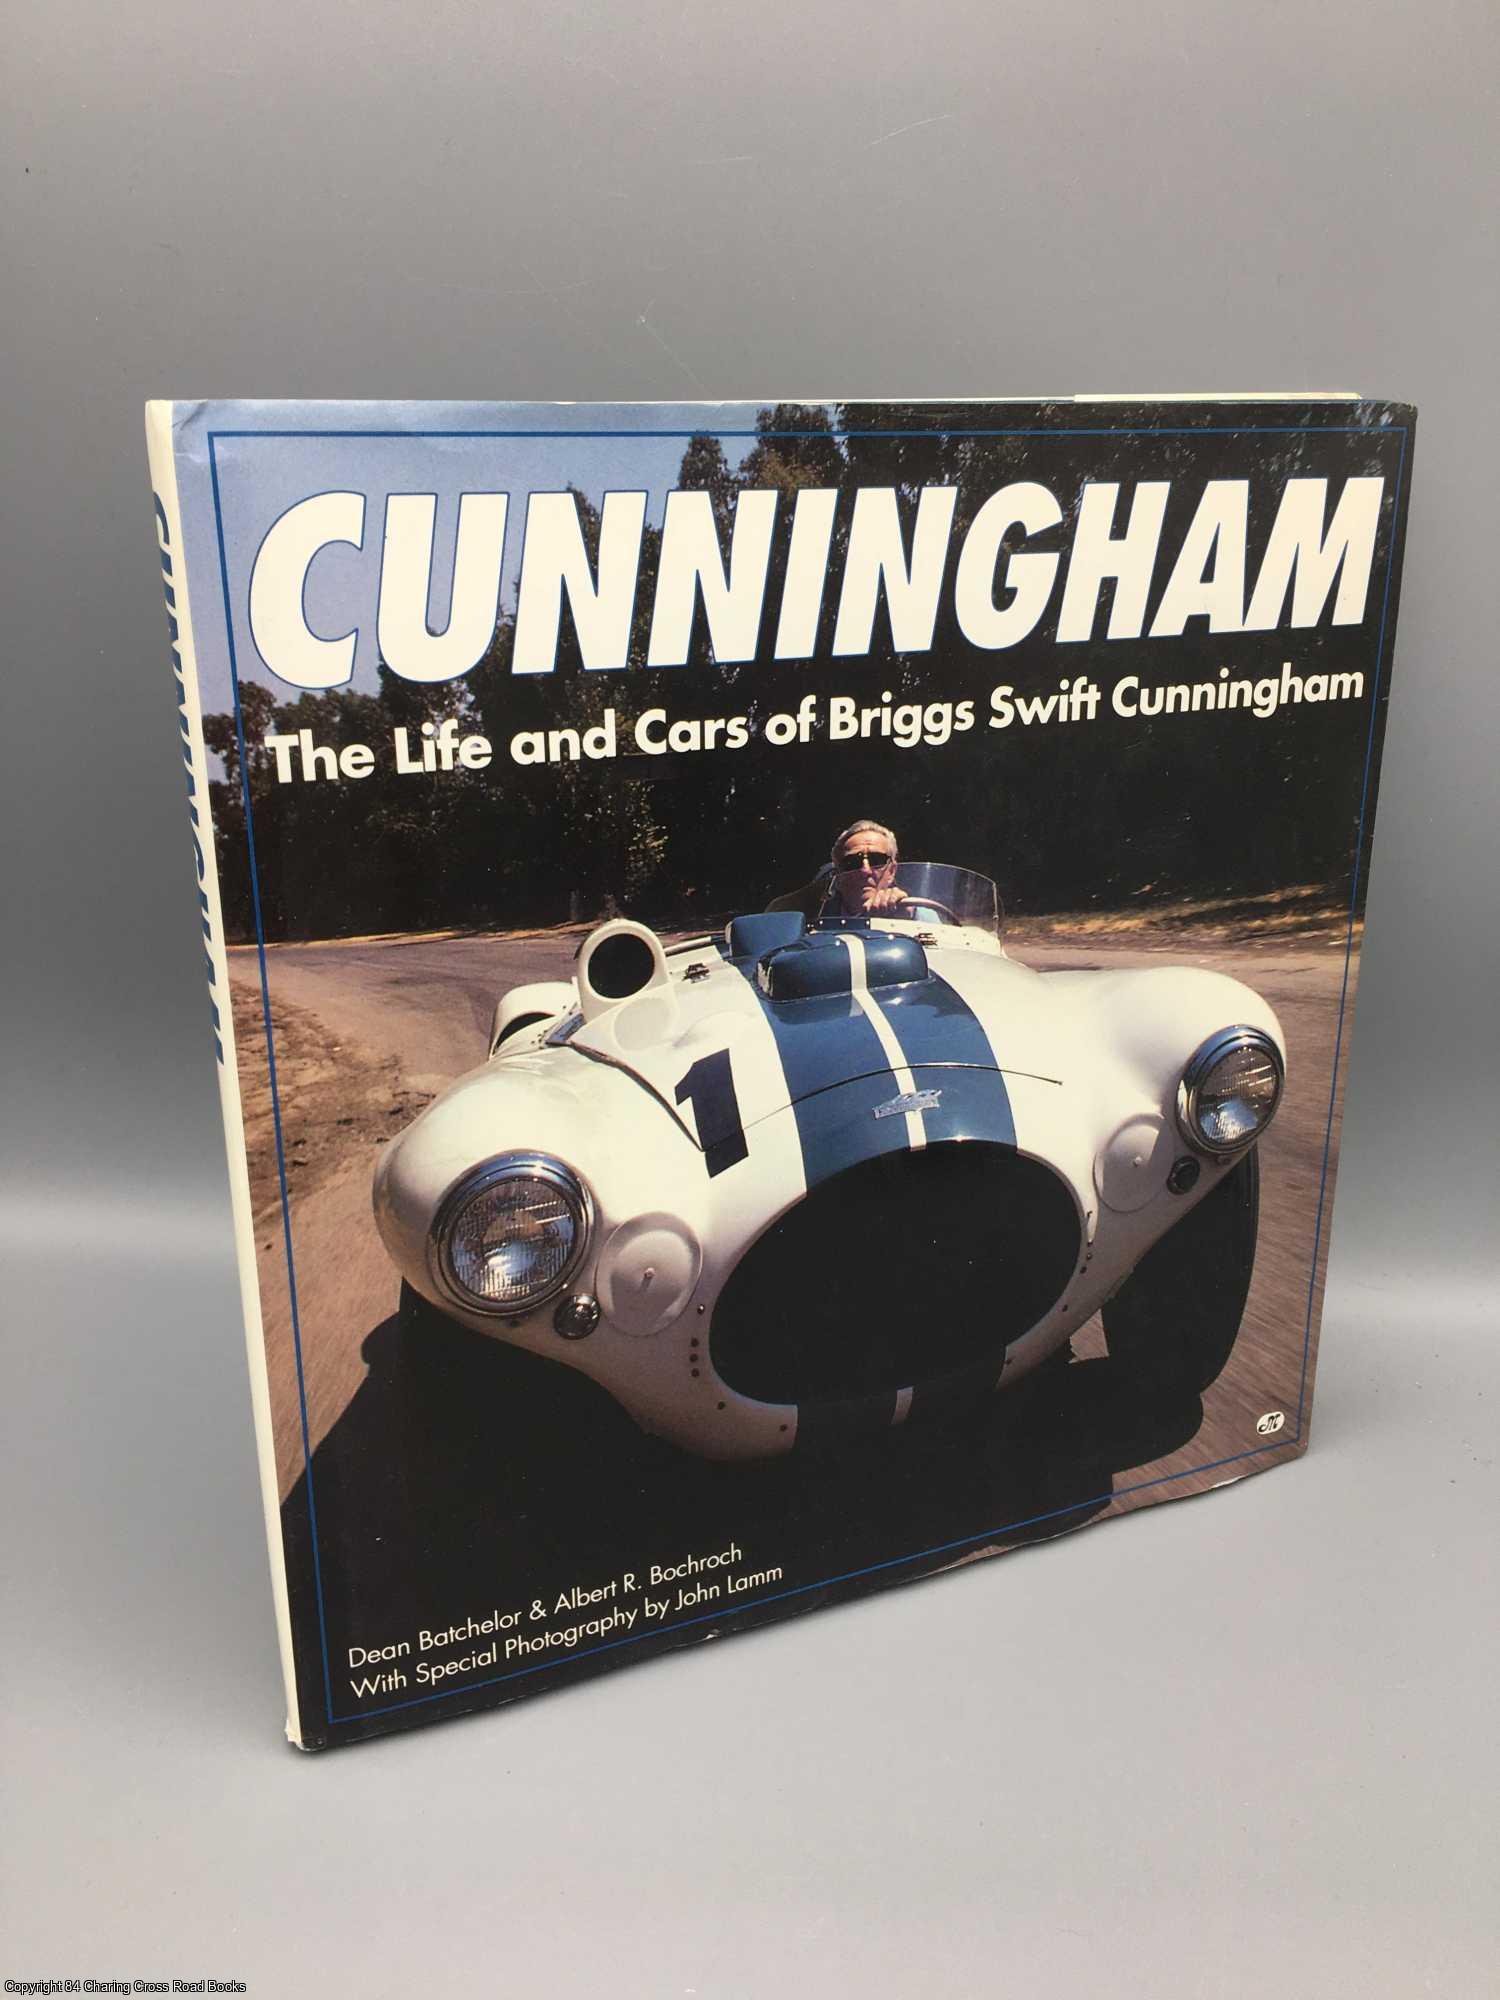 Batchelor, Dean (Signed) - Cunningham: the life & swift cars of Briggs Swift Cunningham